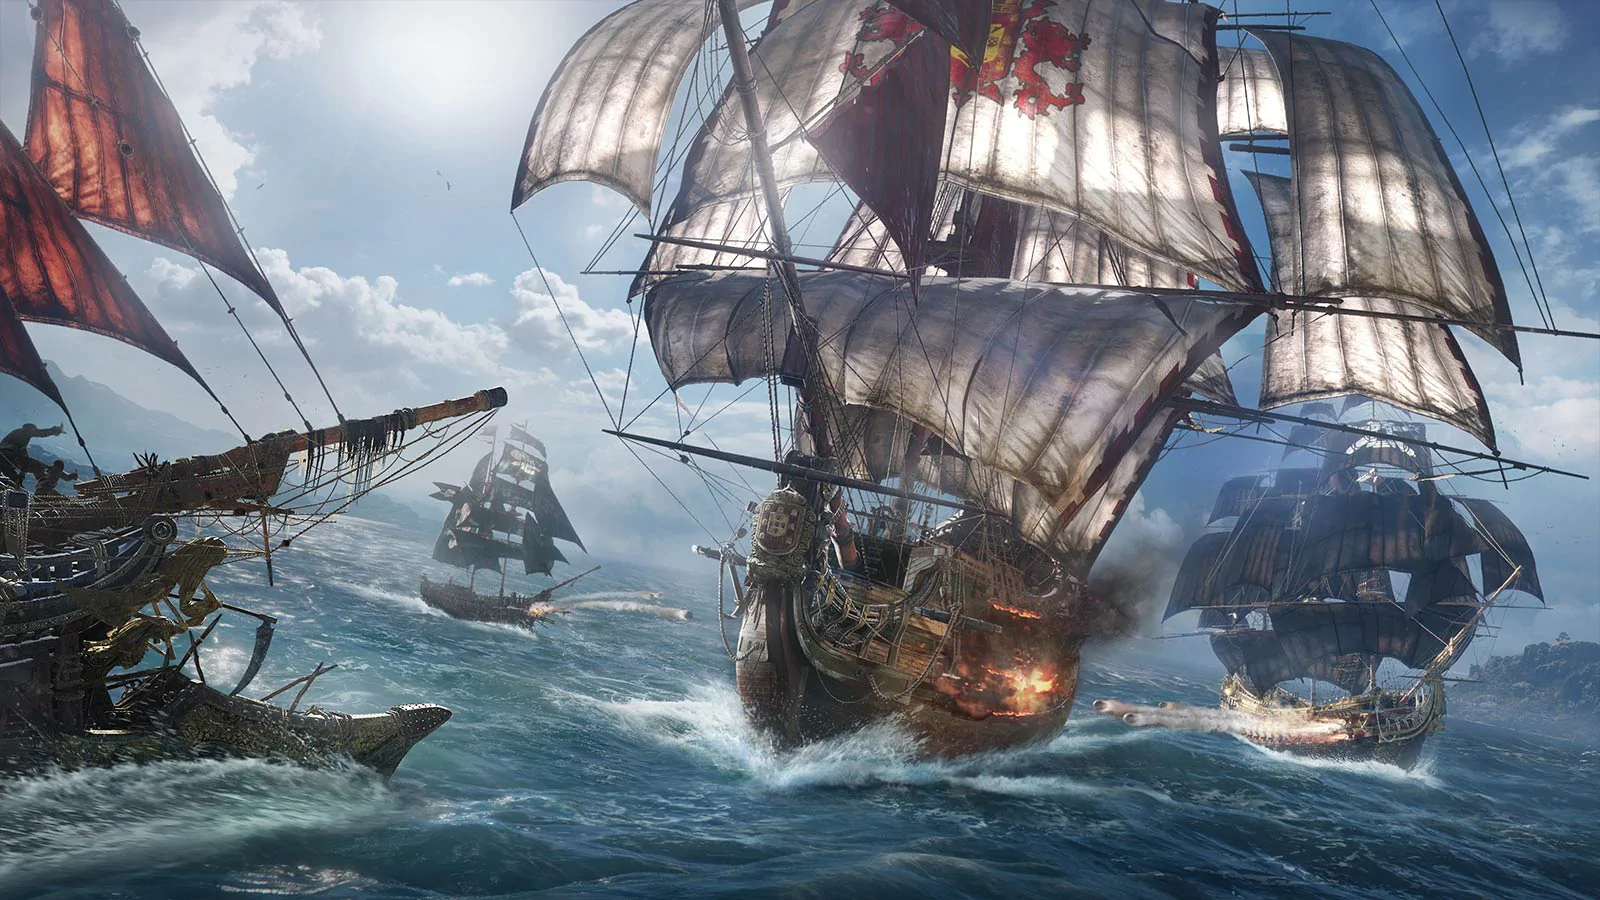 Ubisoft’s Skull & Bones is still in development, and will be a live game